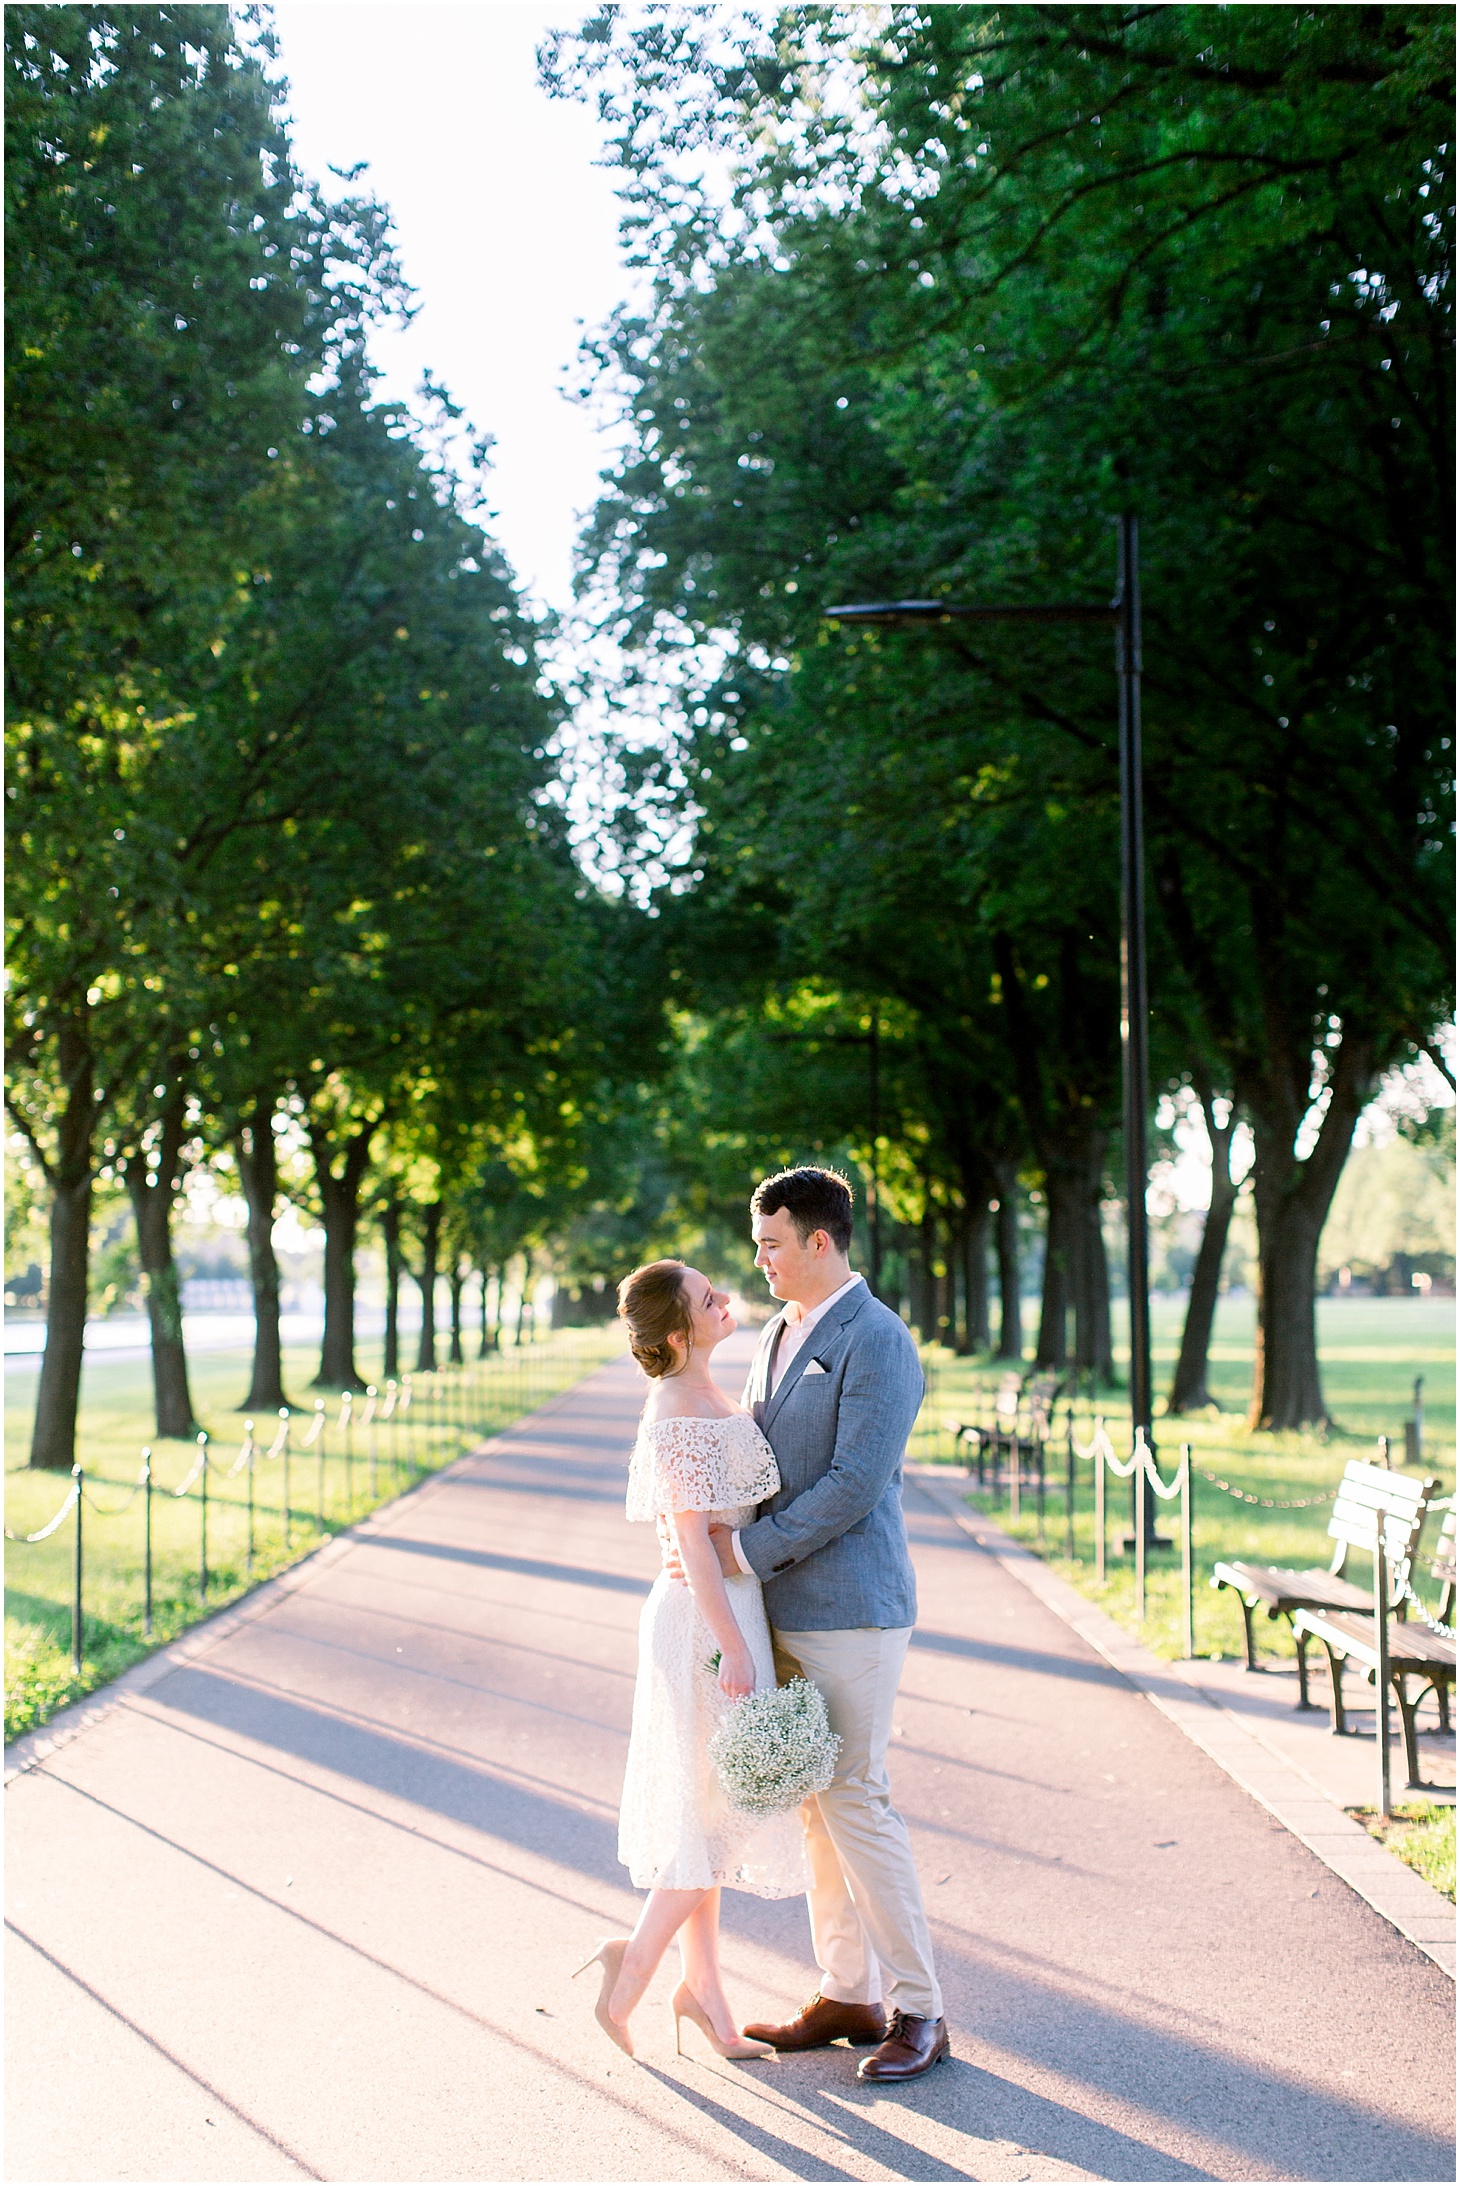 Portraits on the National Mall, Intimate Sunrise Wedding Portraits at the Lincoln Memorial, Sarah Bradshaw Photography, DC Wedding Photographer